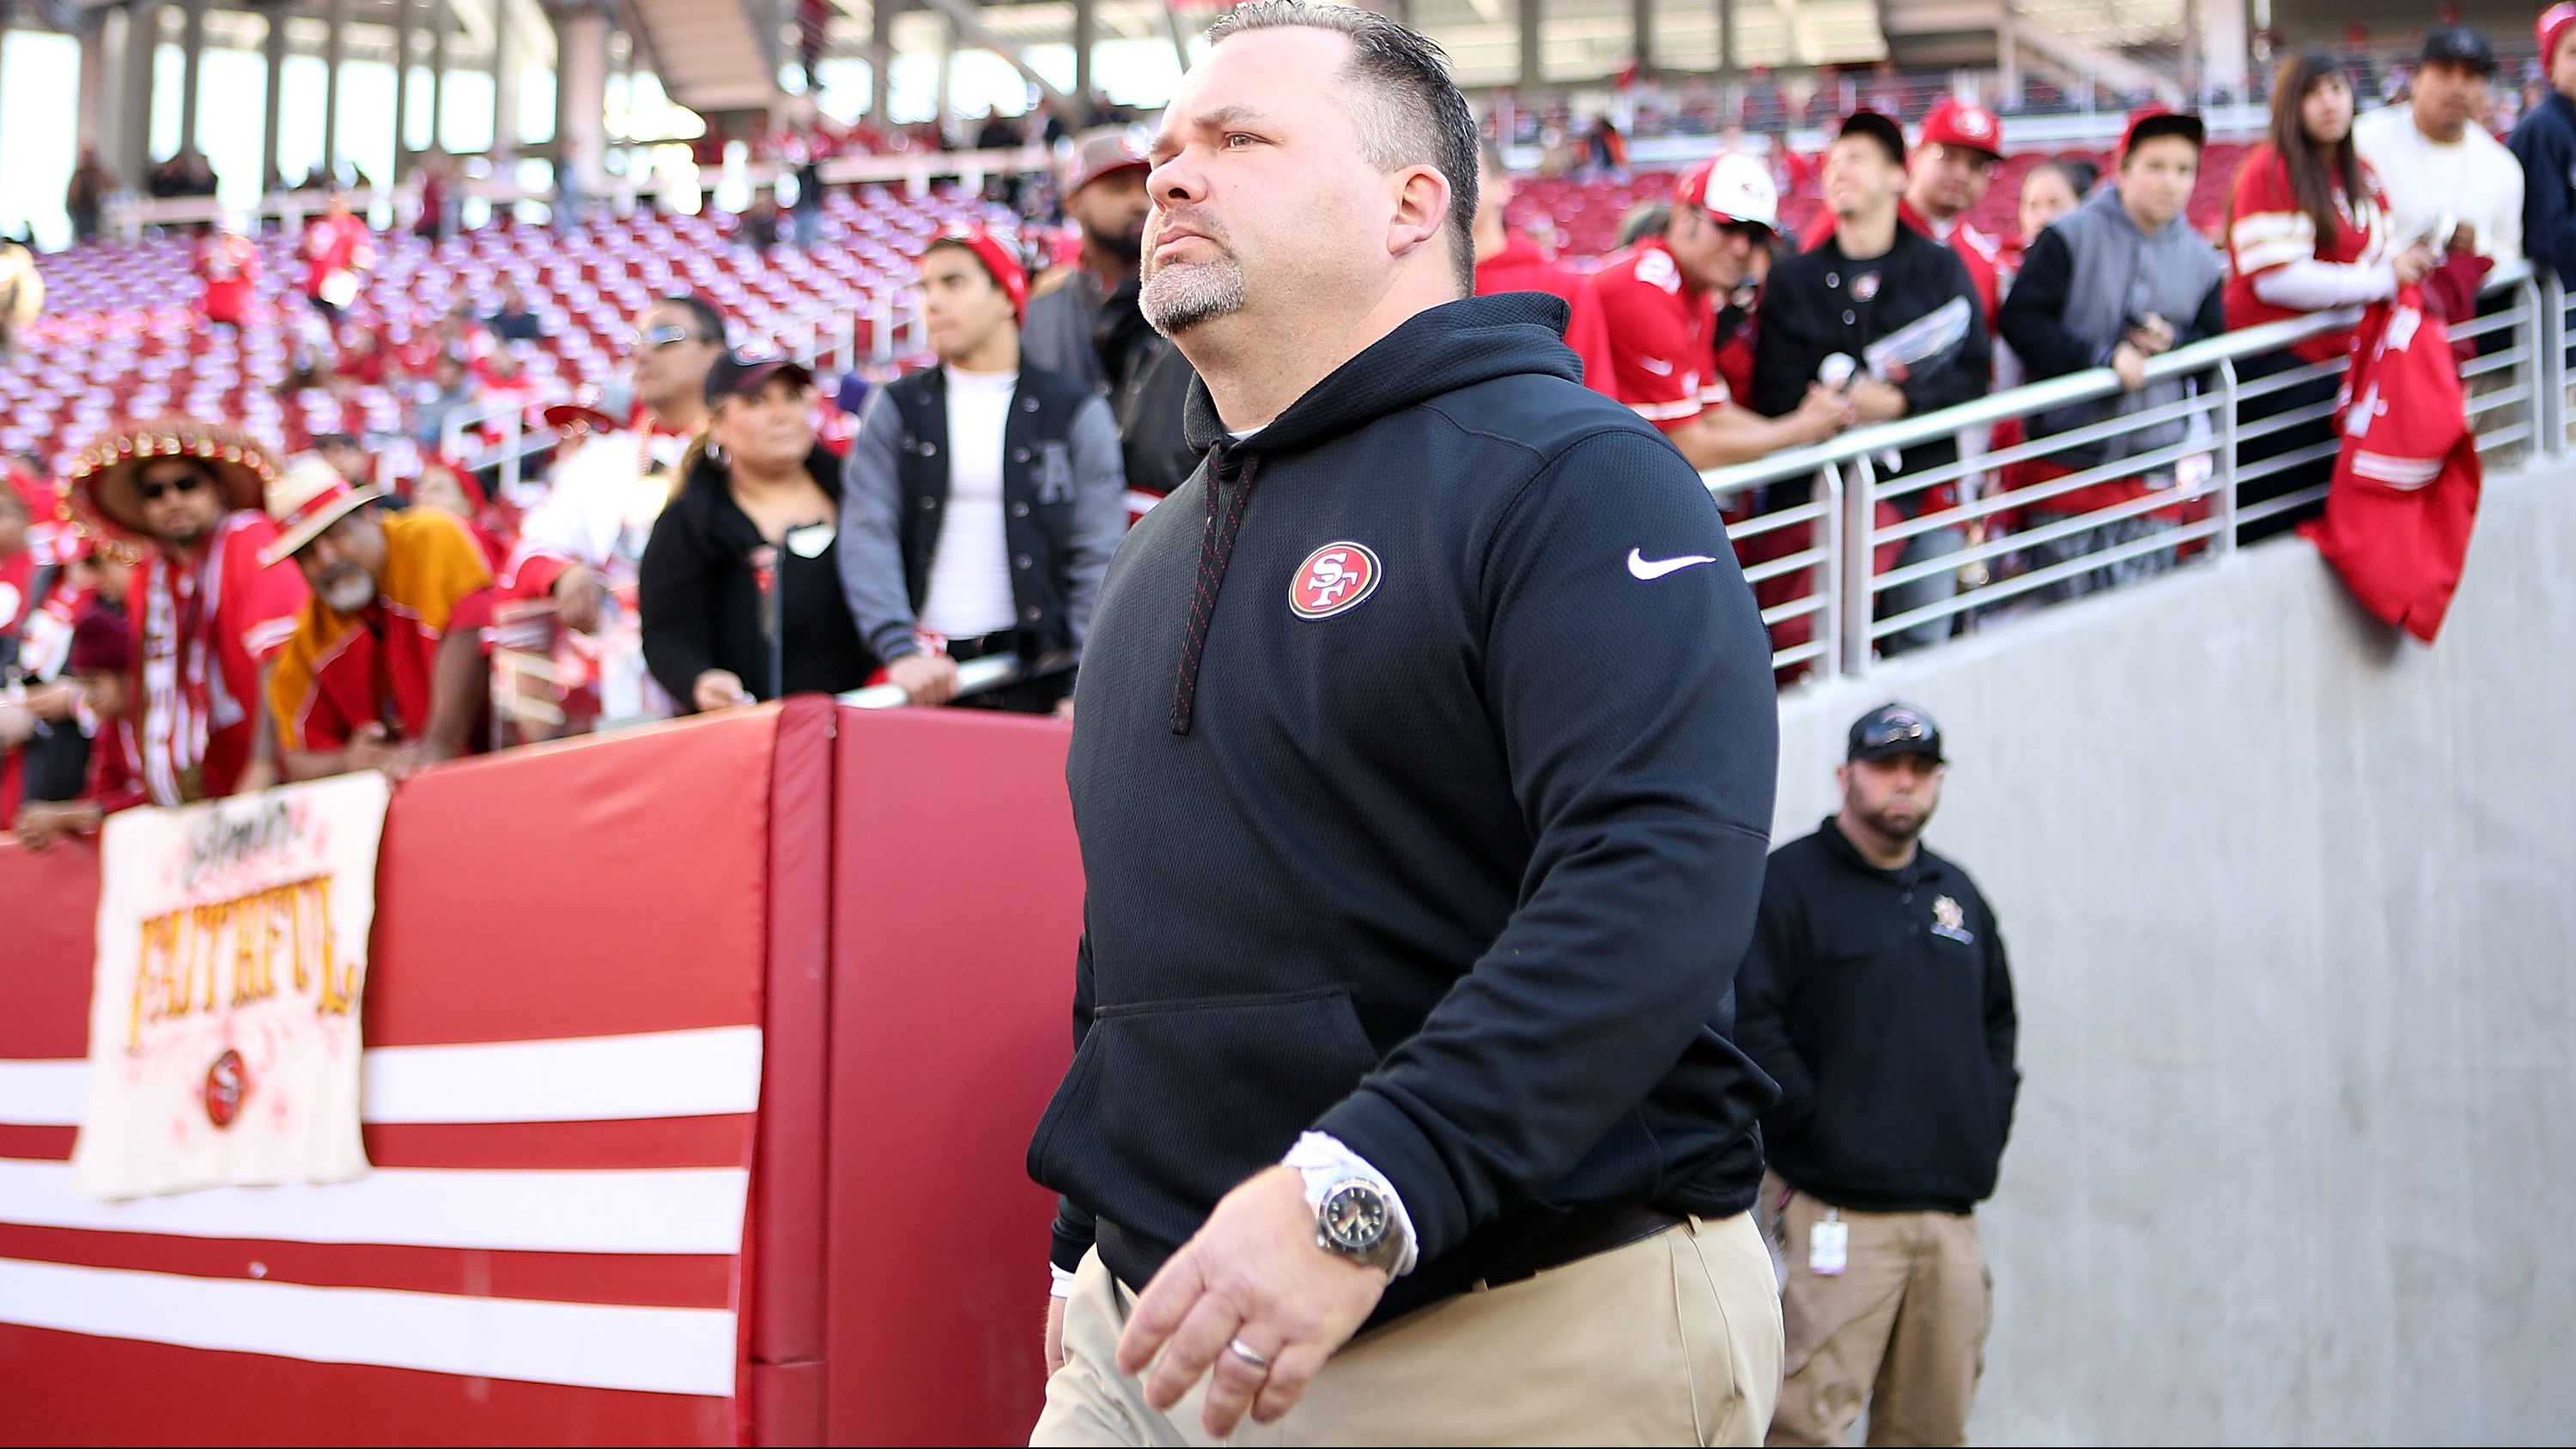 Past Popular 49ers Assistant in Talks for High-Profile HC Spot: Report